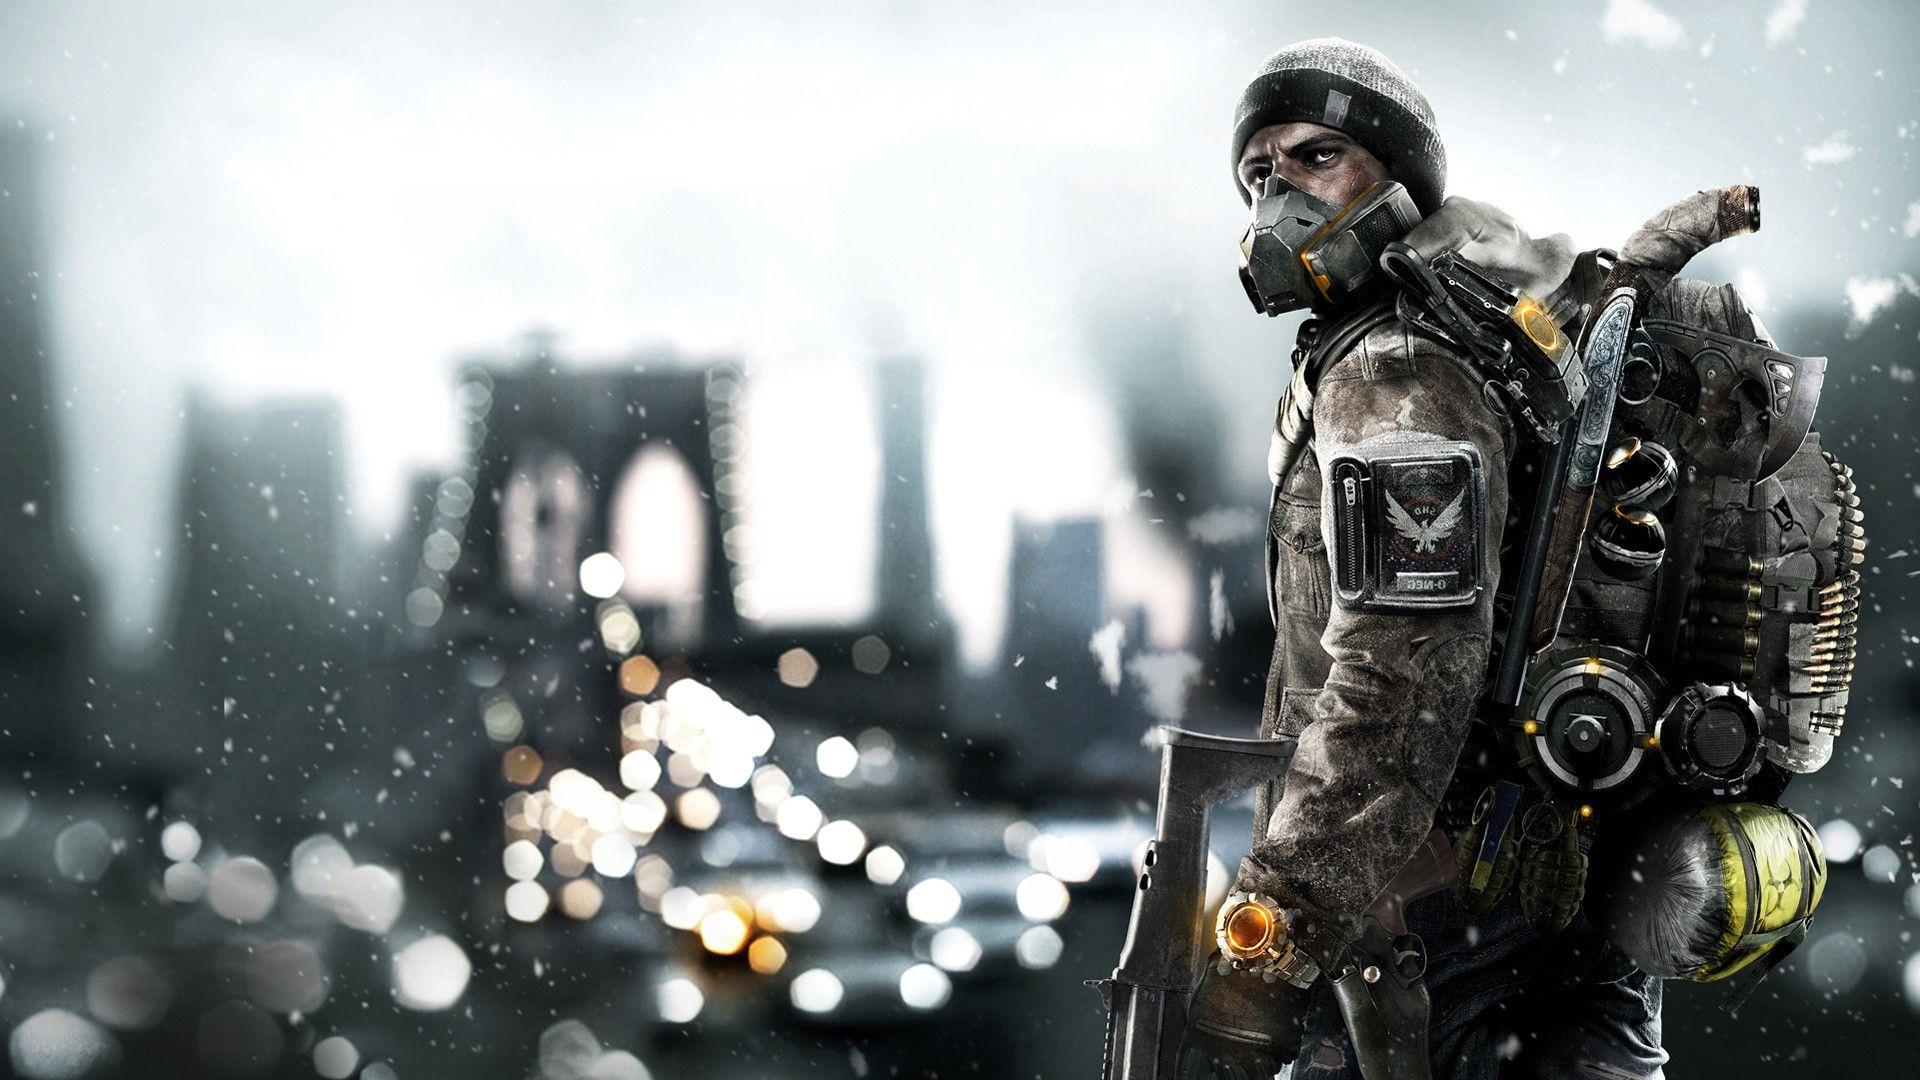 tom clancys the division, #games, #xbox games, #ps4 games, #pc games